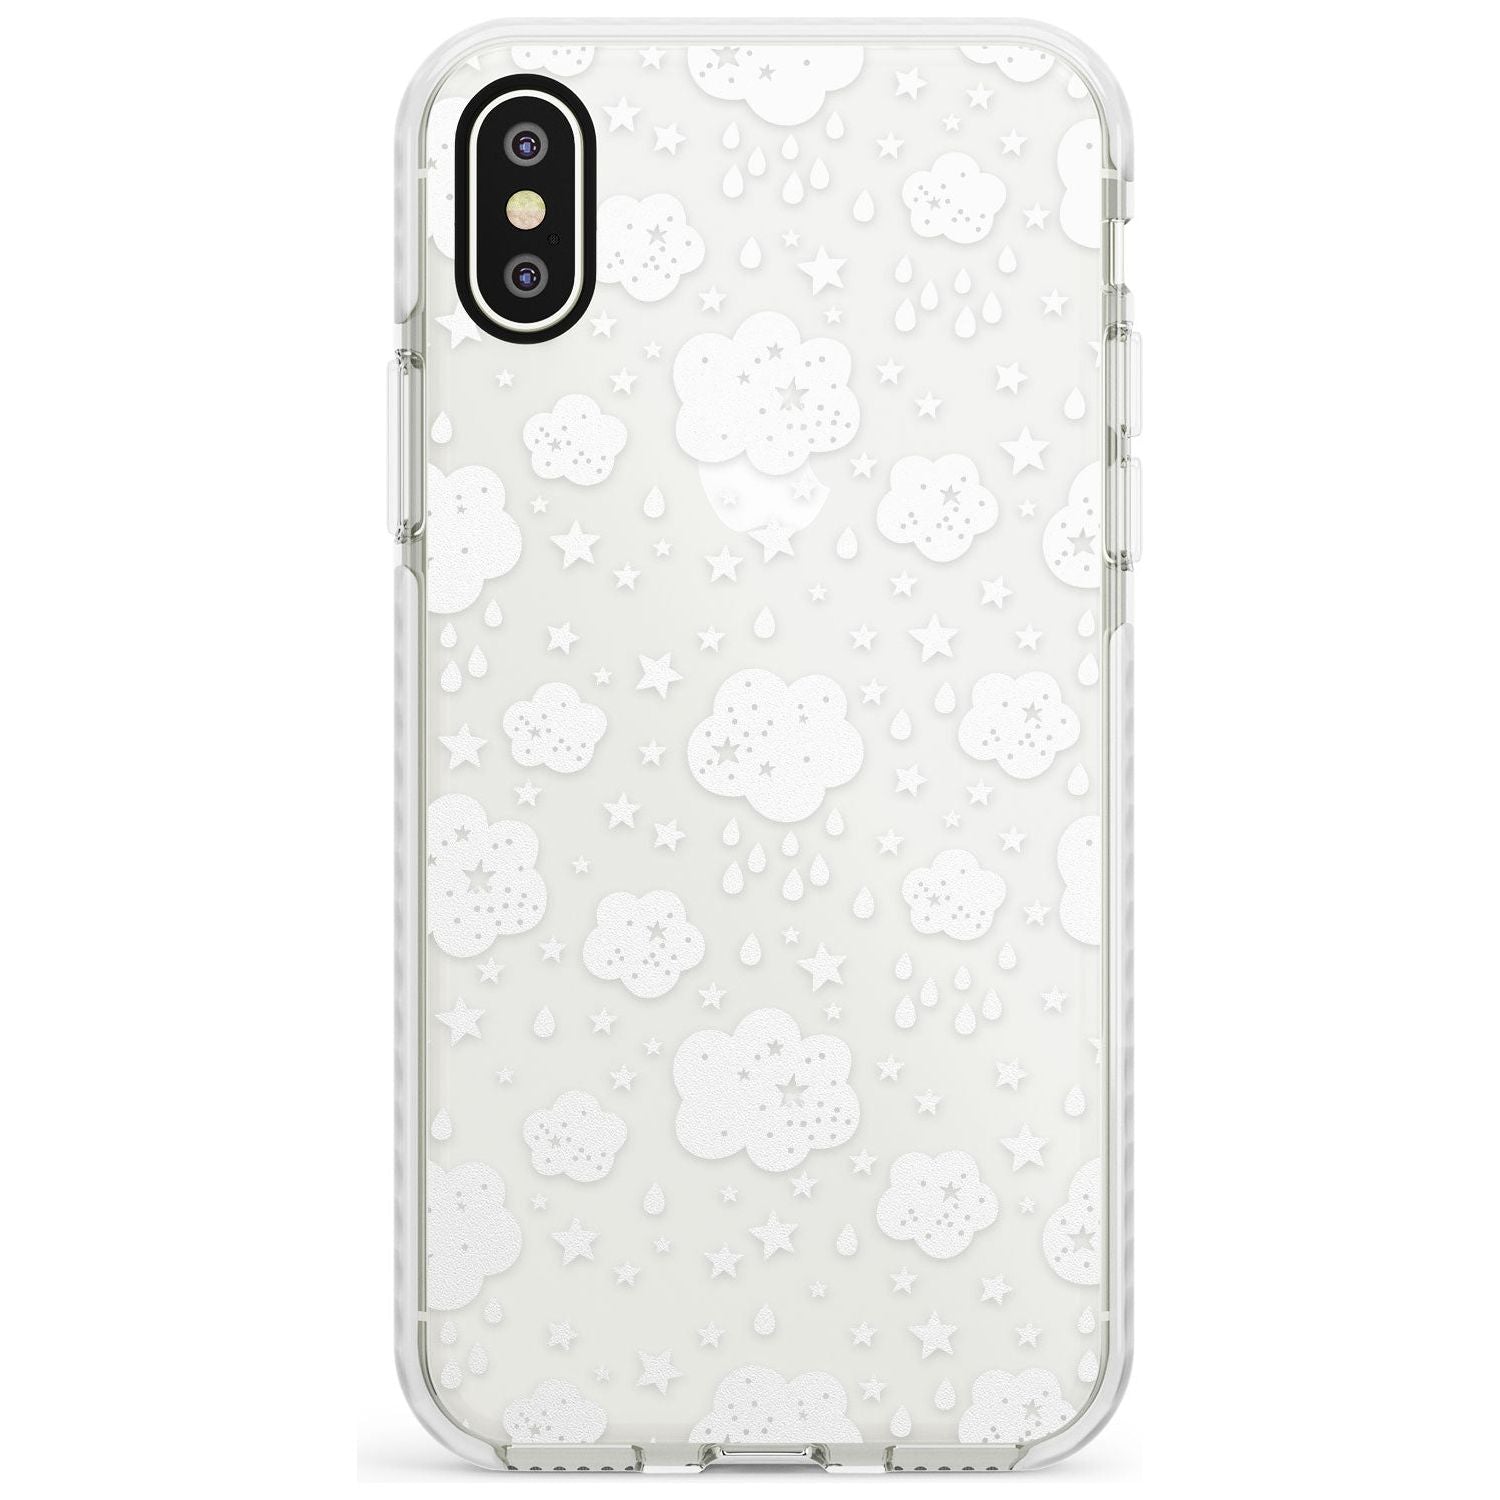 Rainy Days Impact Phone Case for iPhone X XS Max XR